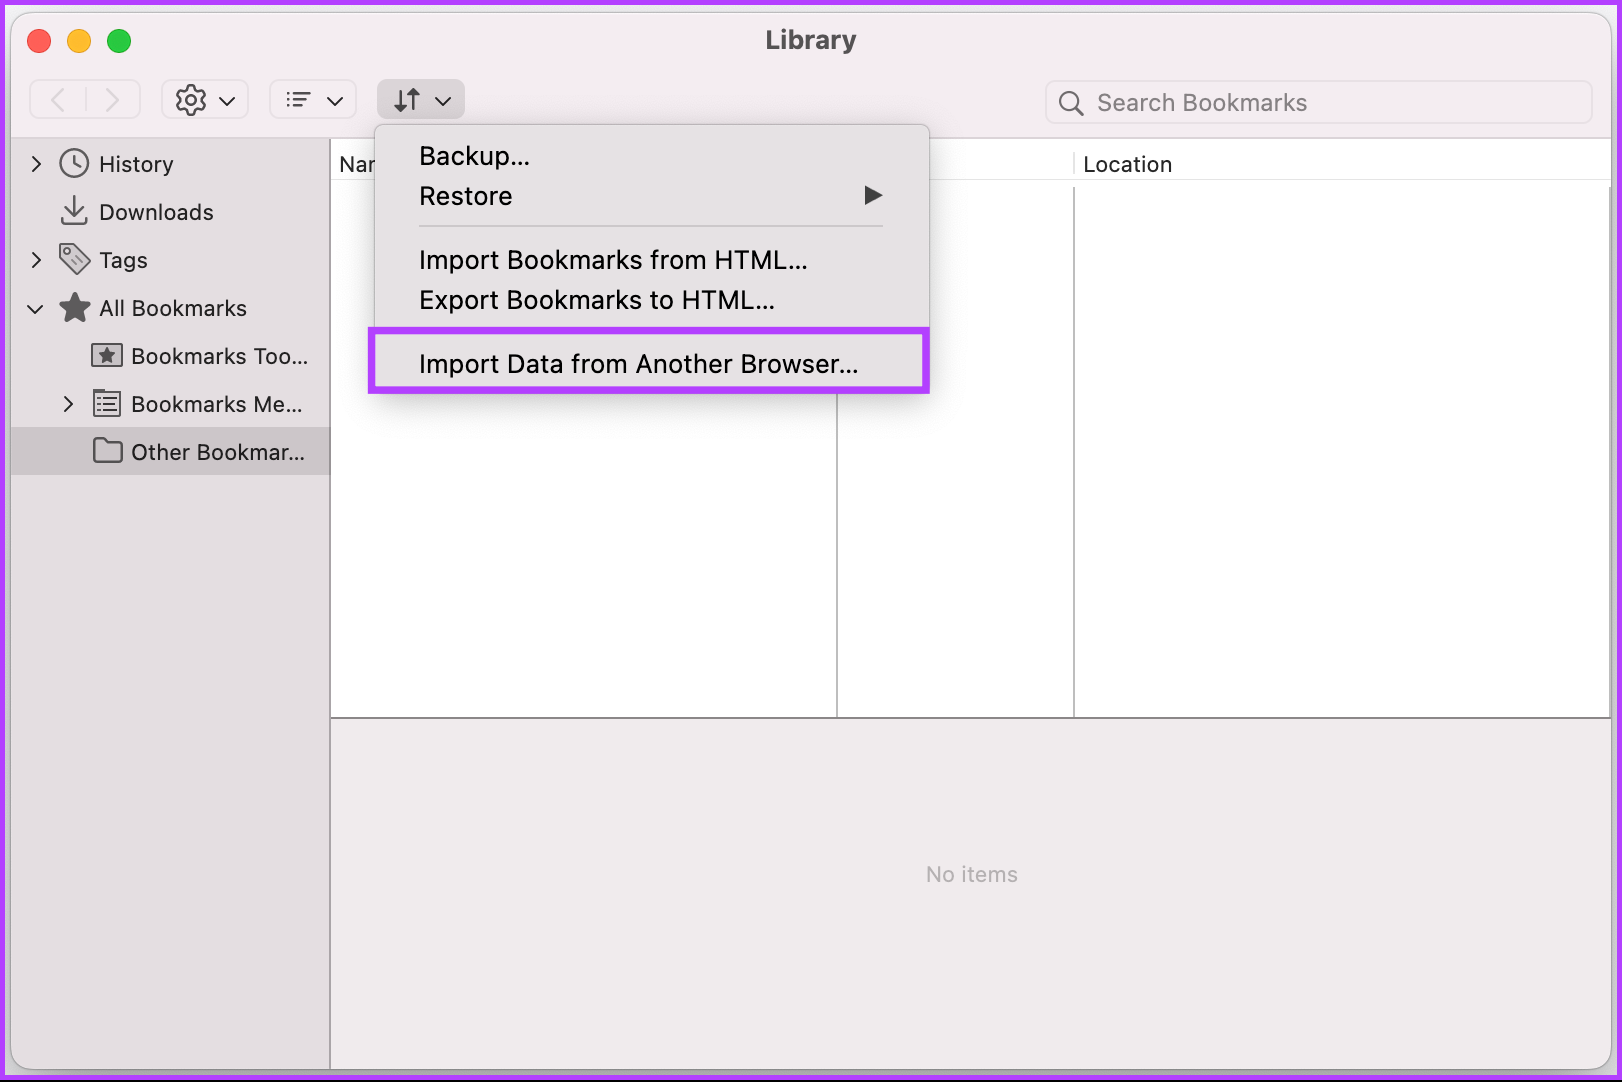 select 'Import Data from Another Browser'